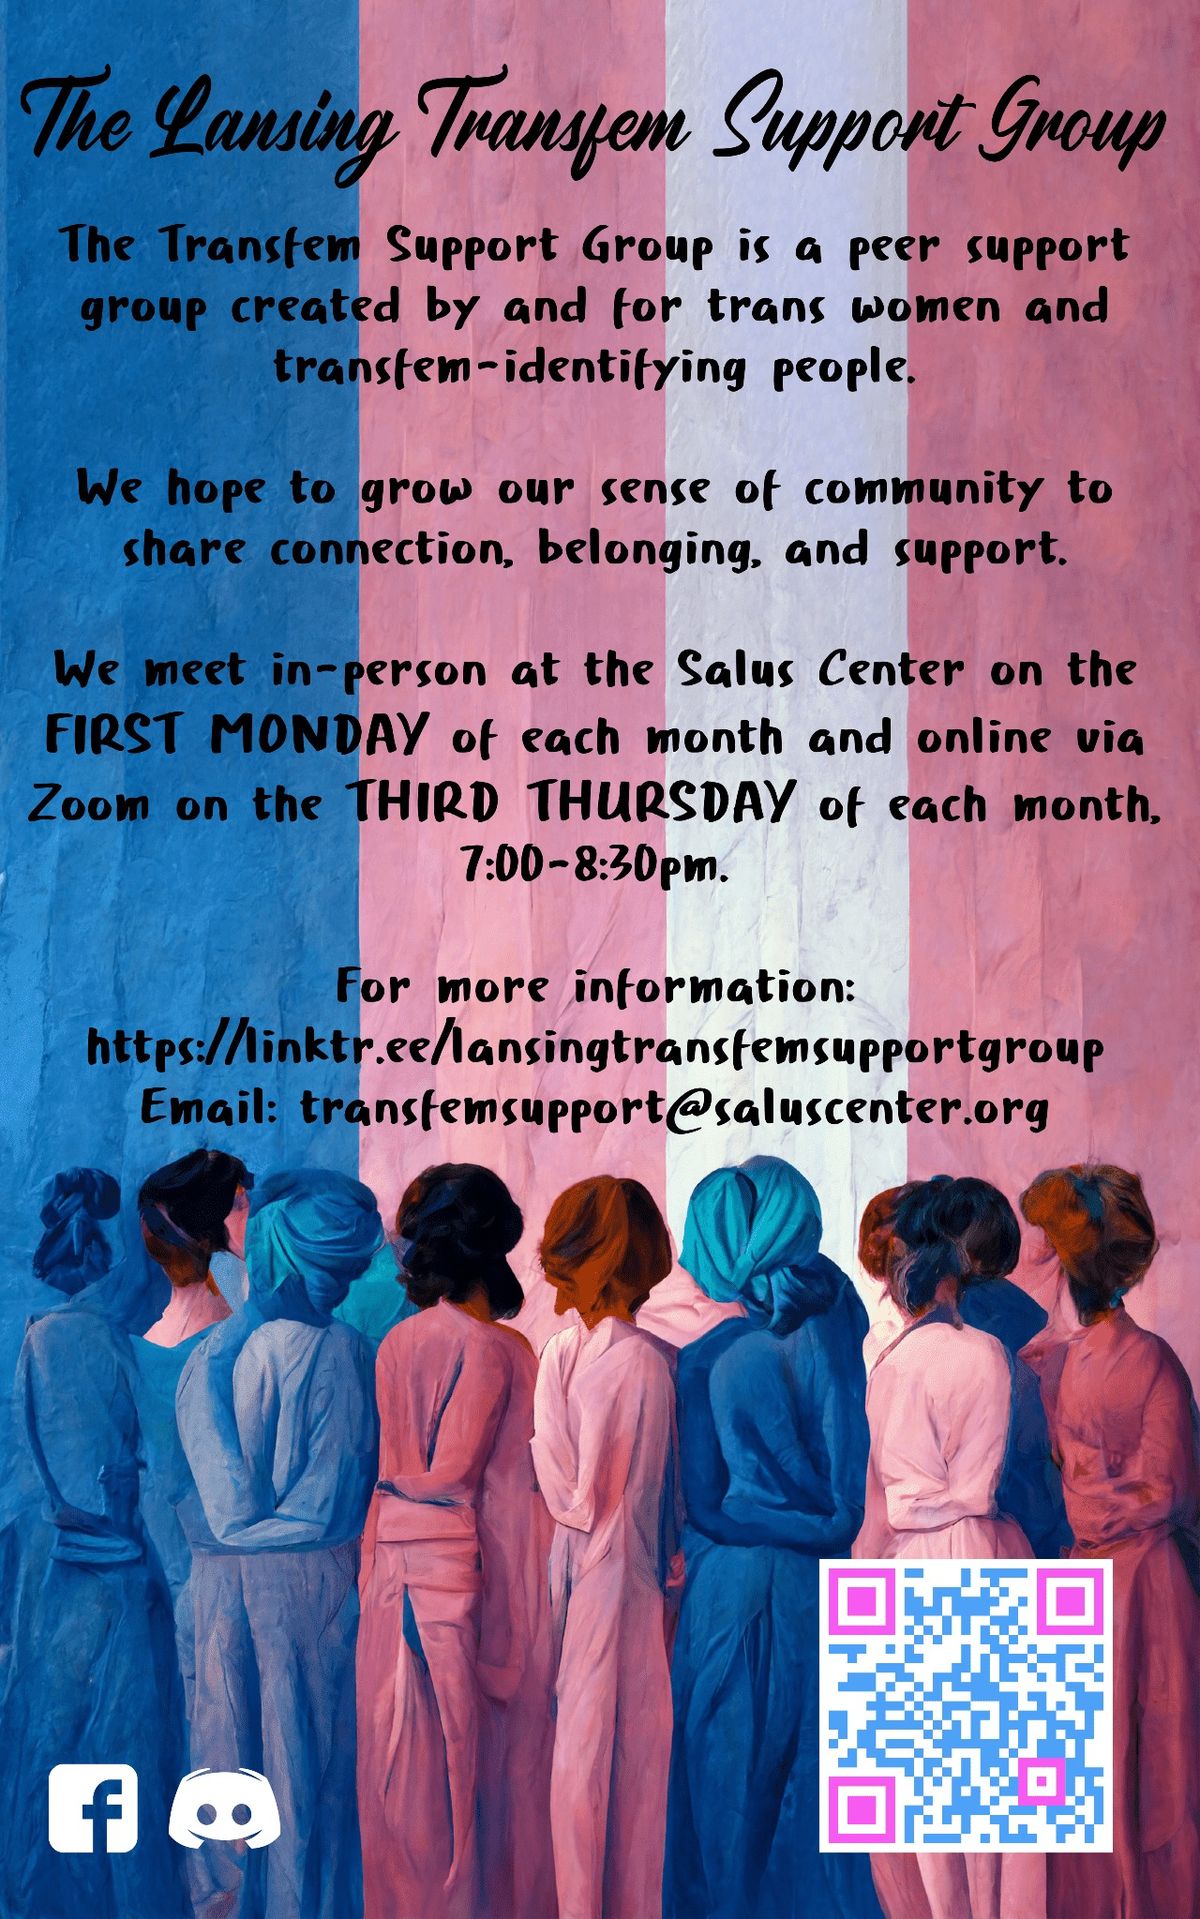 Transfem Support Group